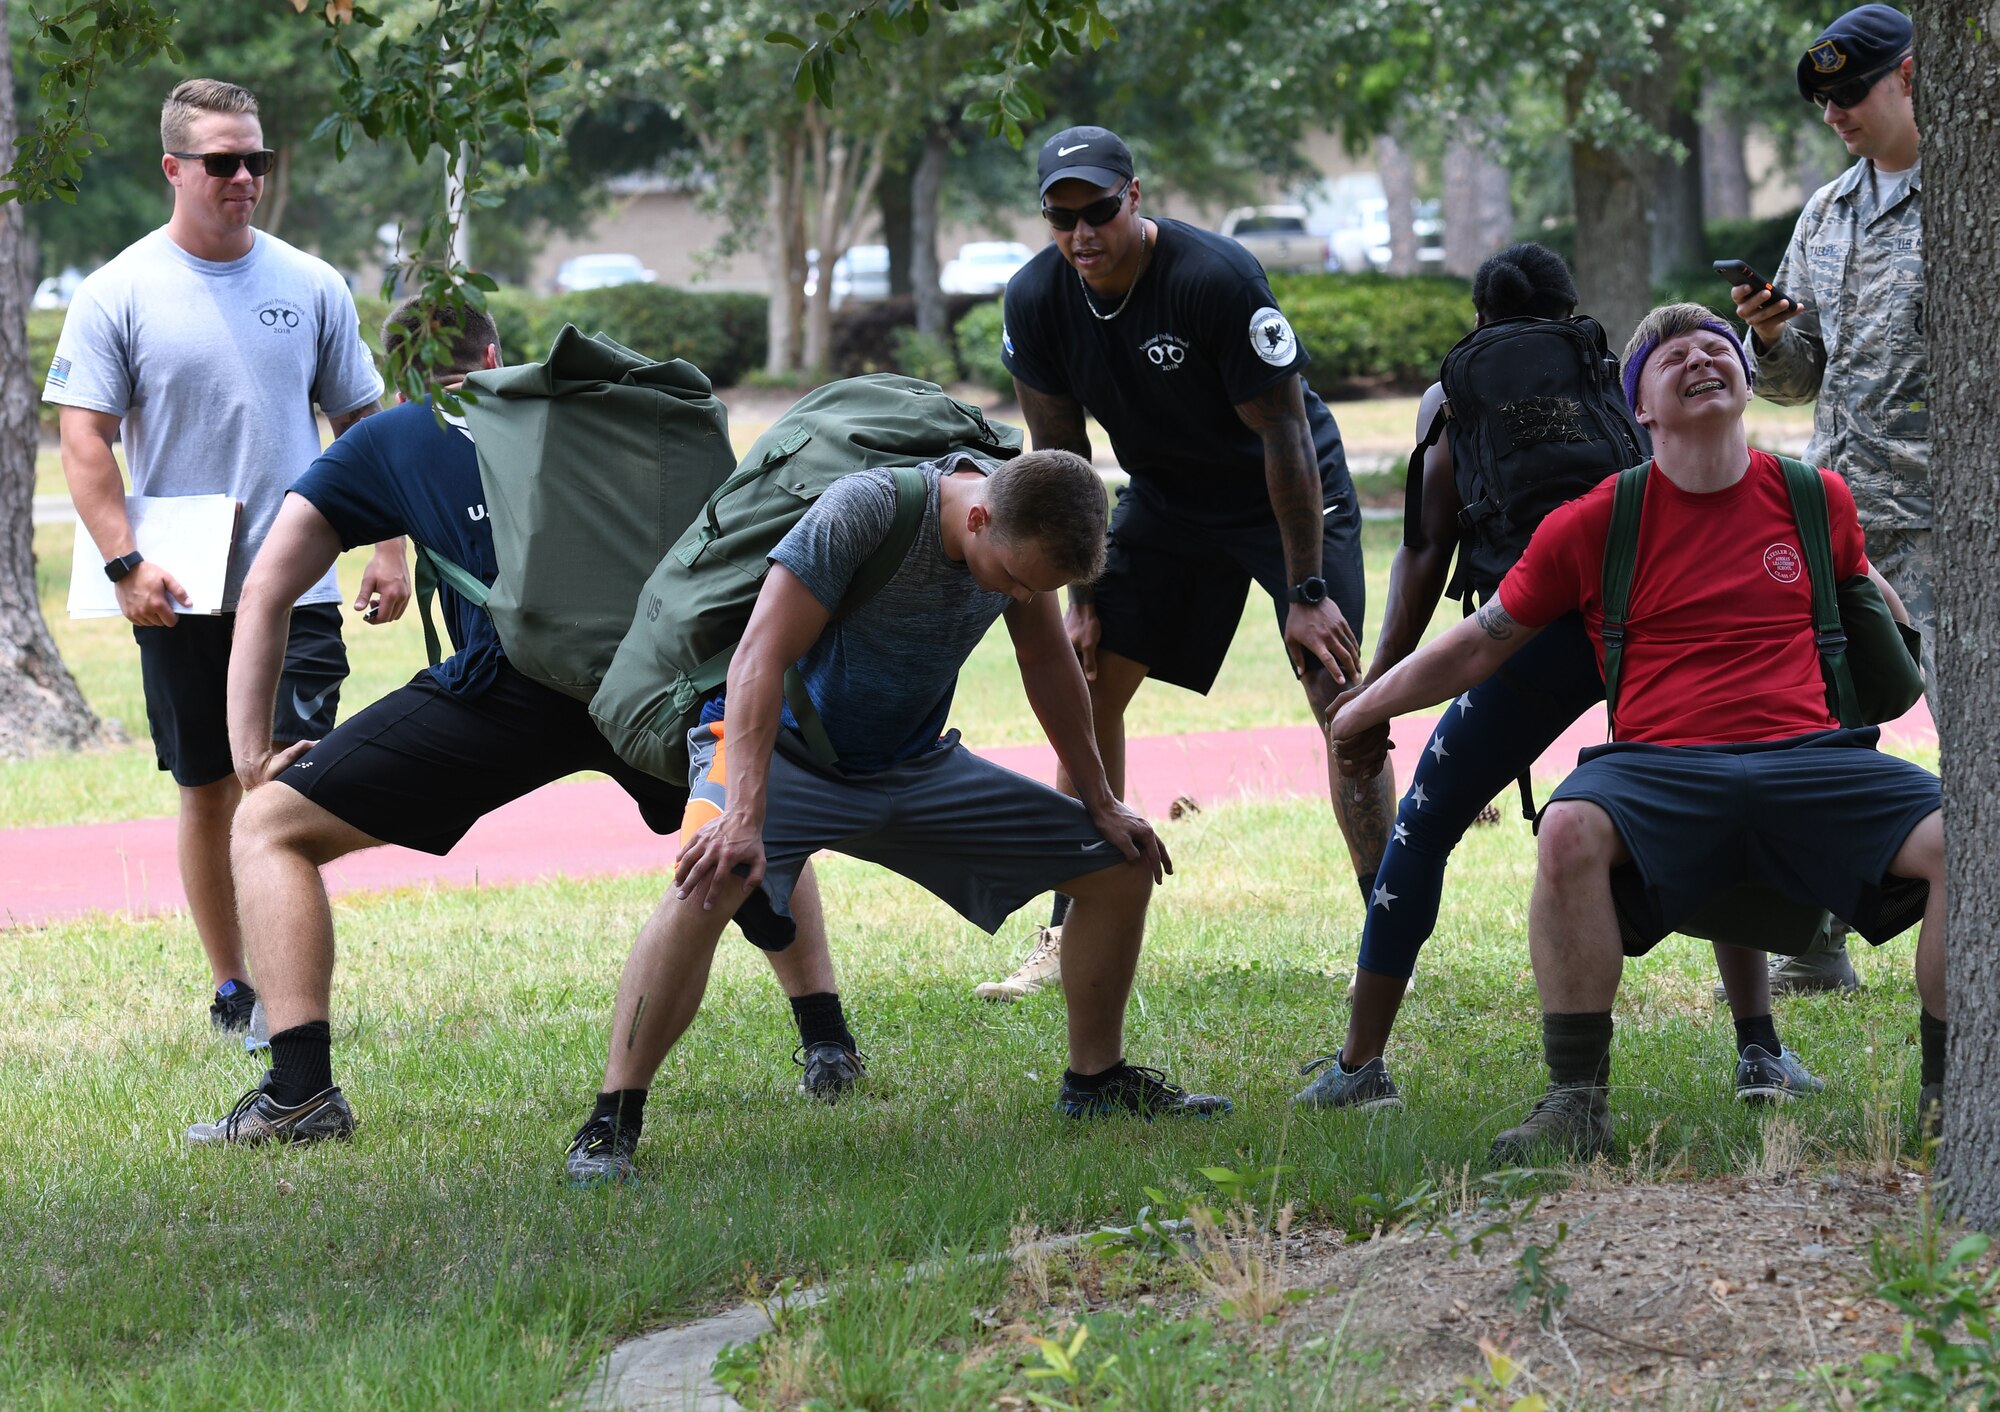 Members of the 81st Communications Squadron team participate in partner squats during the 81st Security Forces Squadron 5K Fallen Defender Ruck and Obstacle Course competition at the Crotwell Track at Keesler Air Force Base, Mississippi, May 15, 2018. The event was held during National Police Week, which recognizes the service of law enforcement men and women who put their lives at risk every day. (U.S. Air Force photo by Kemberly Groue)